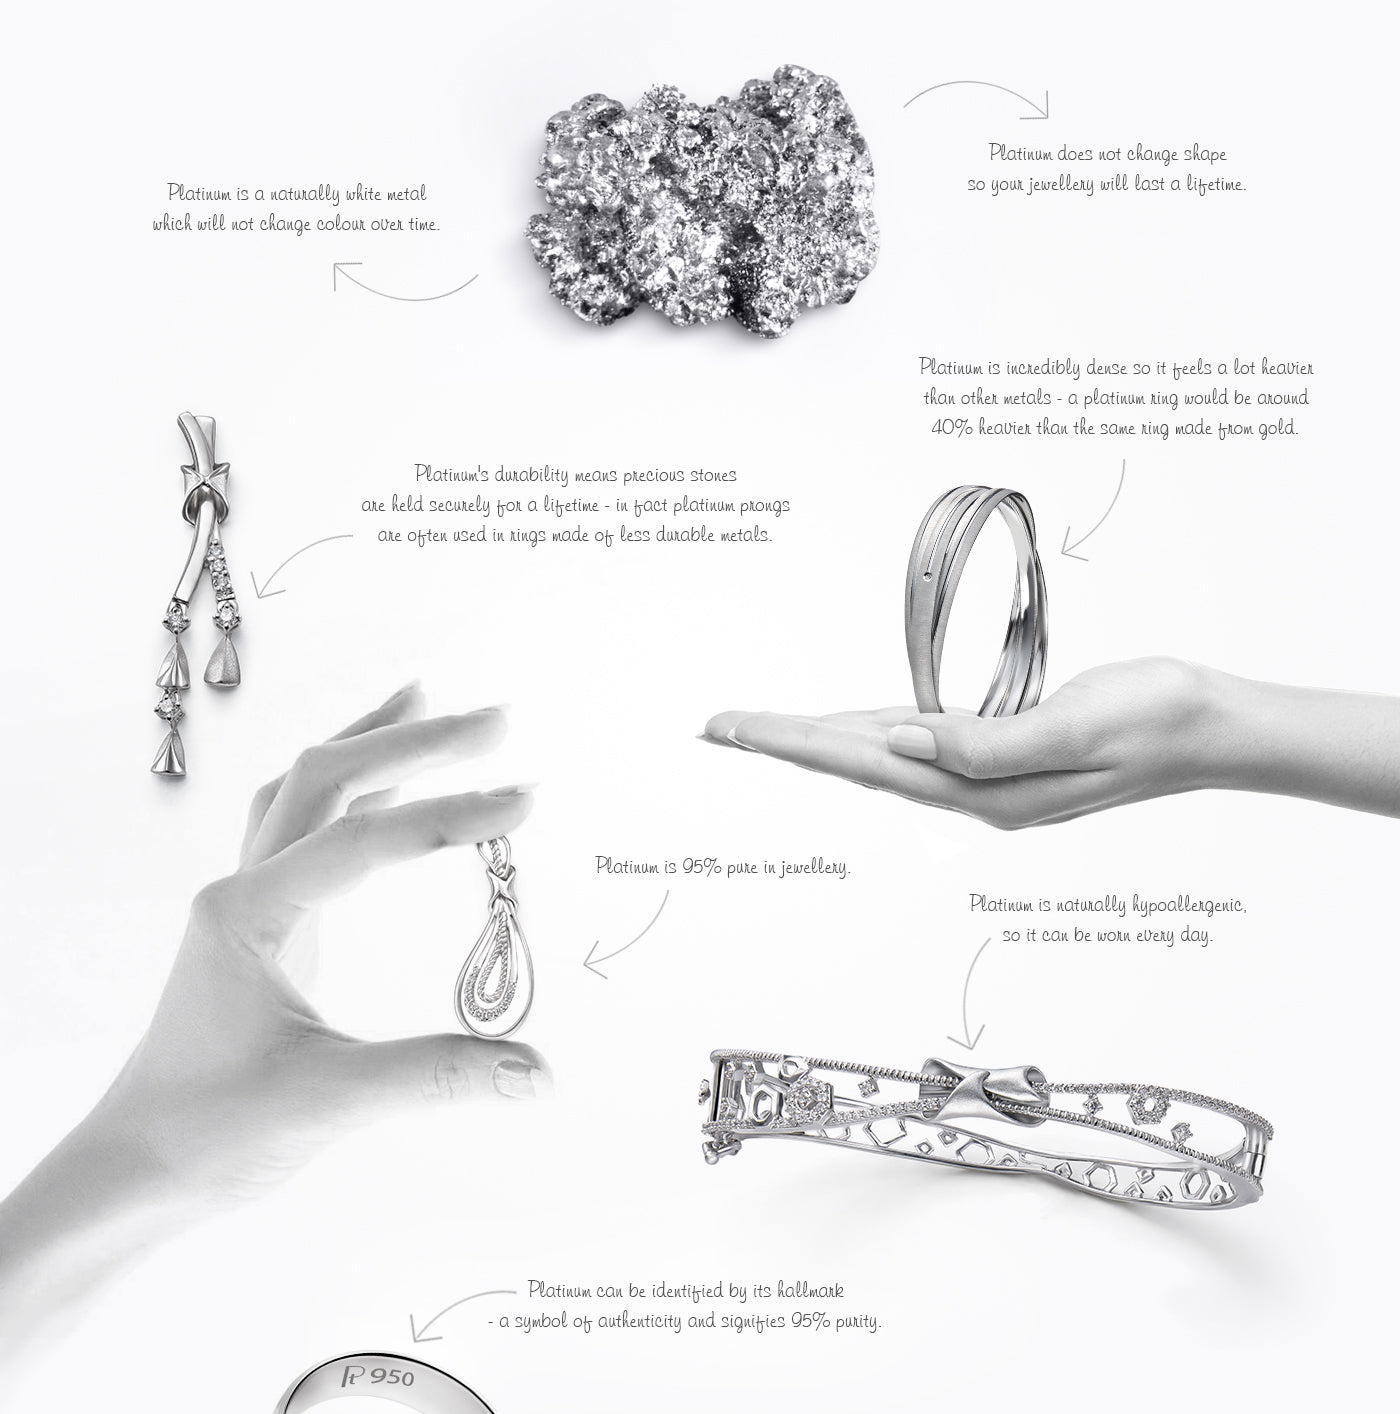 Qualities of Platinum that make it ideal for your jewelry